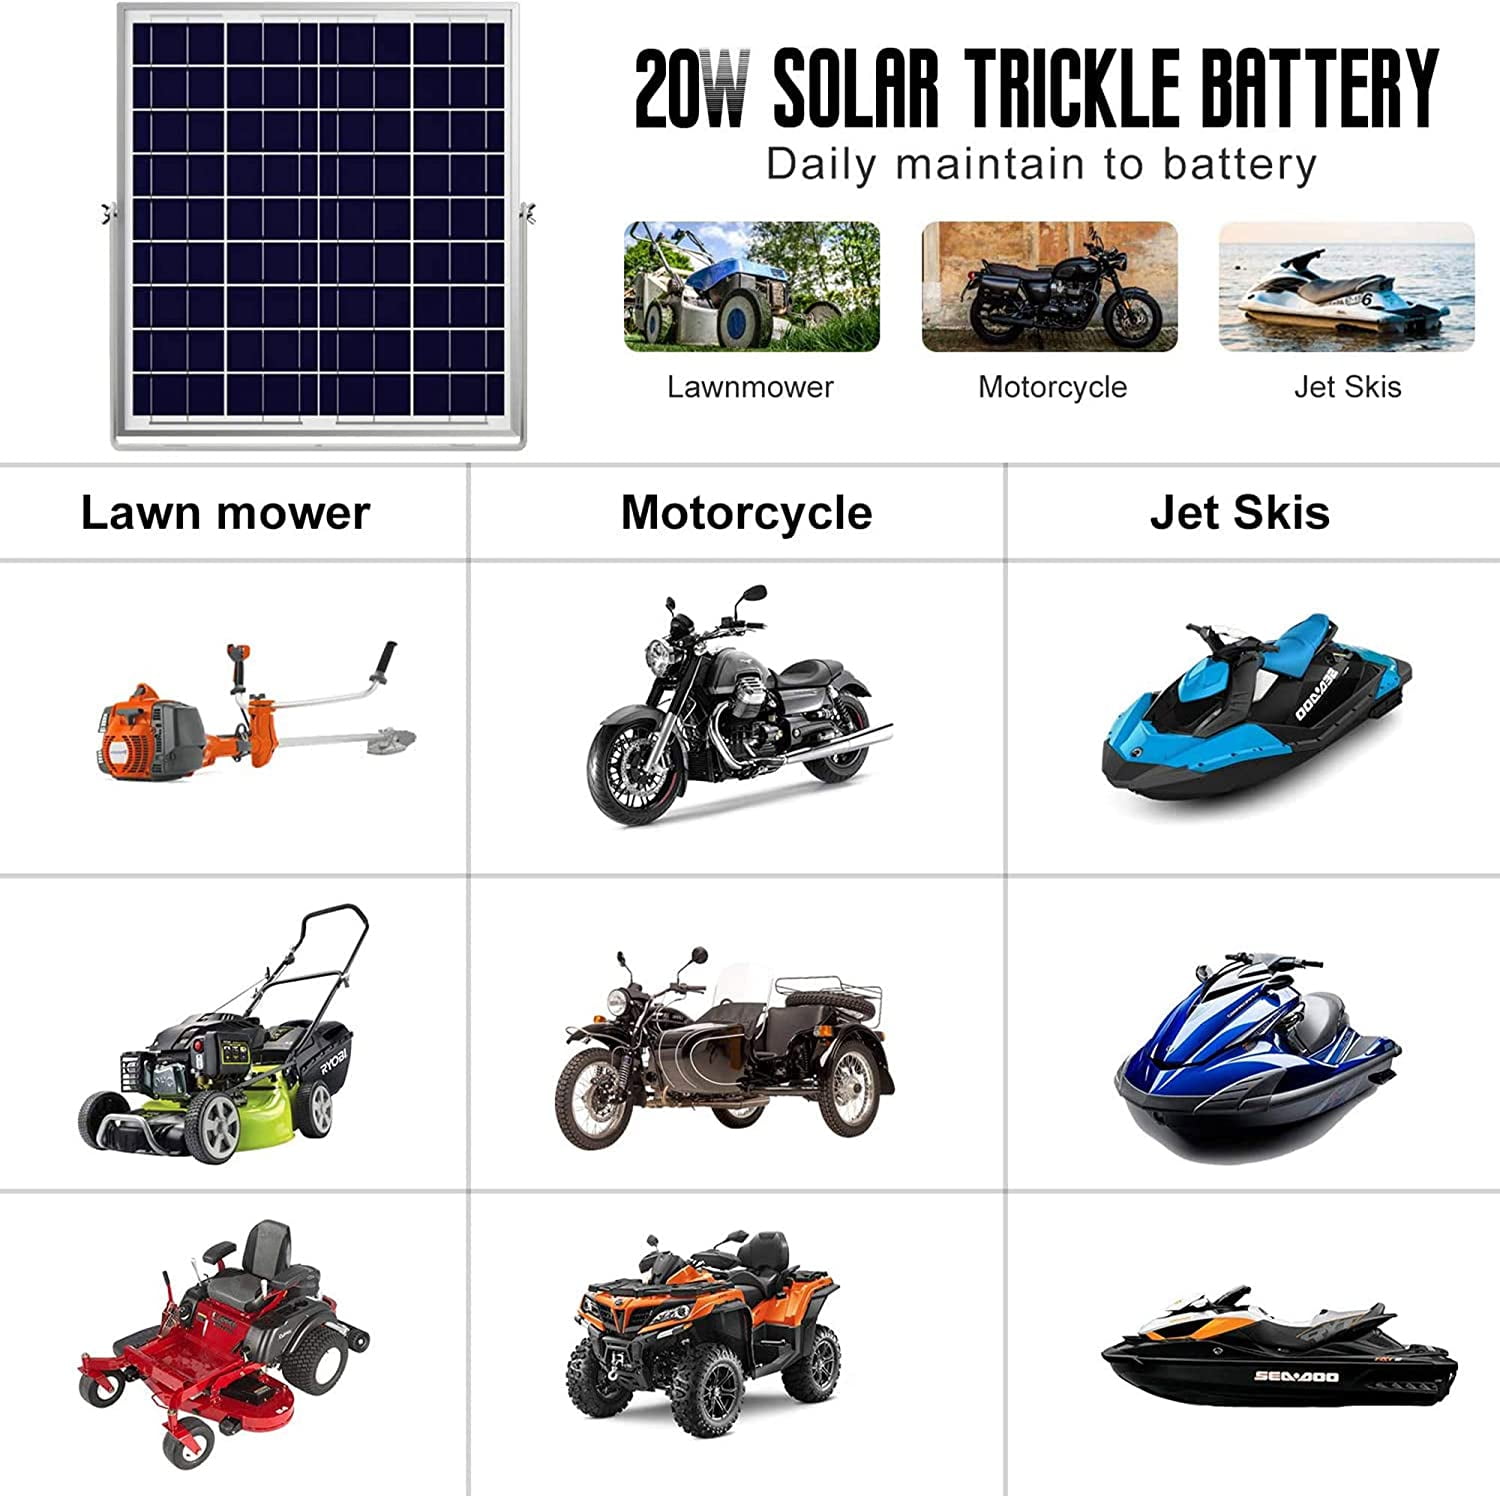 SOLPERK 20W Solar Panel，12V Solar Panel Charger Kit+8A Controller， Suitable for Automotive 20W Solar Motorcycle Boat RV Trailer ATV Powersports Marine Snowmobile etc Various 12V Batteries. 